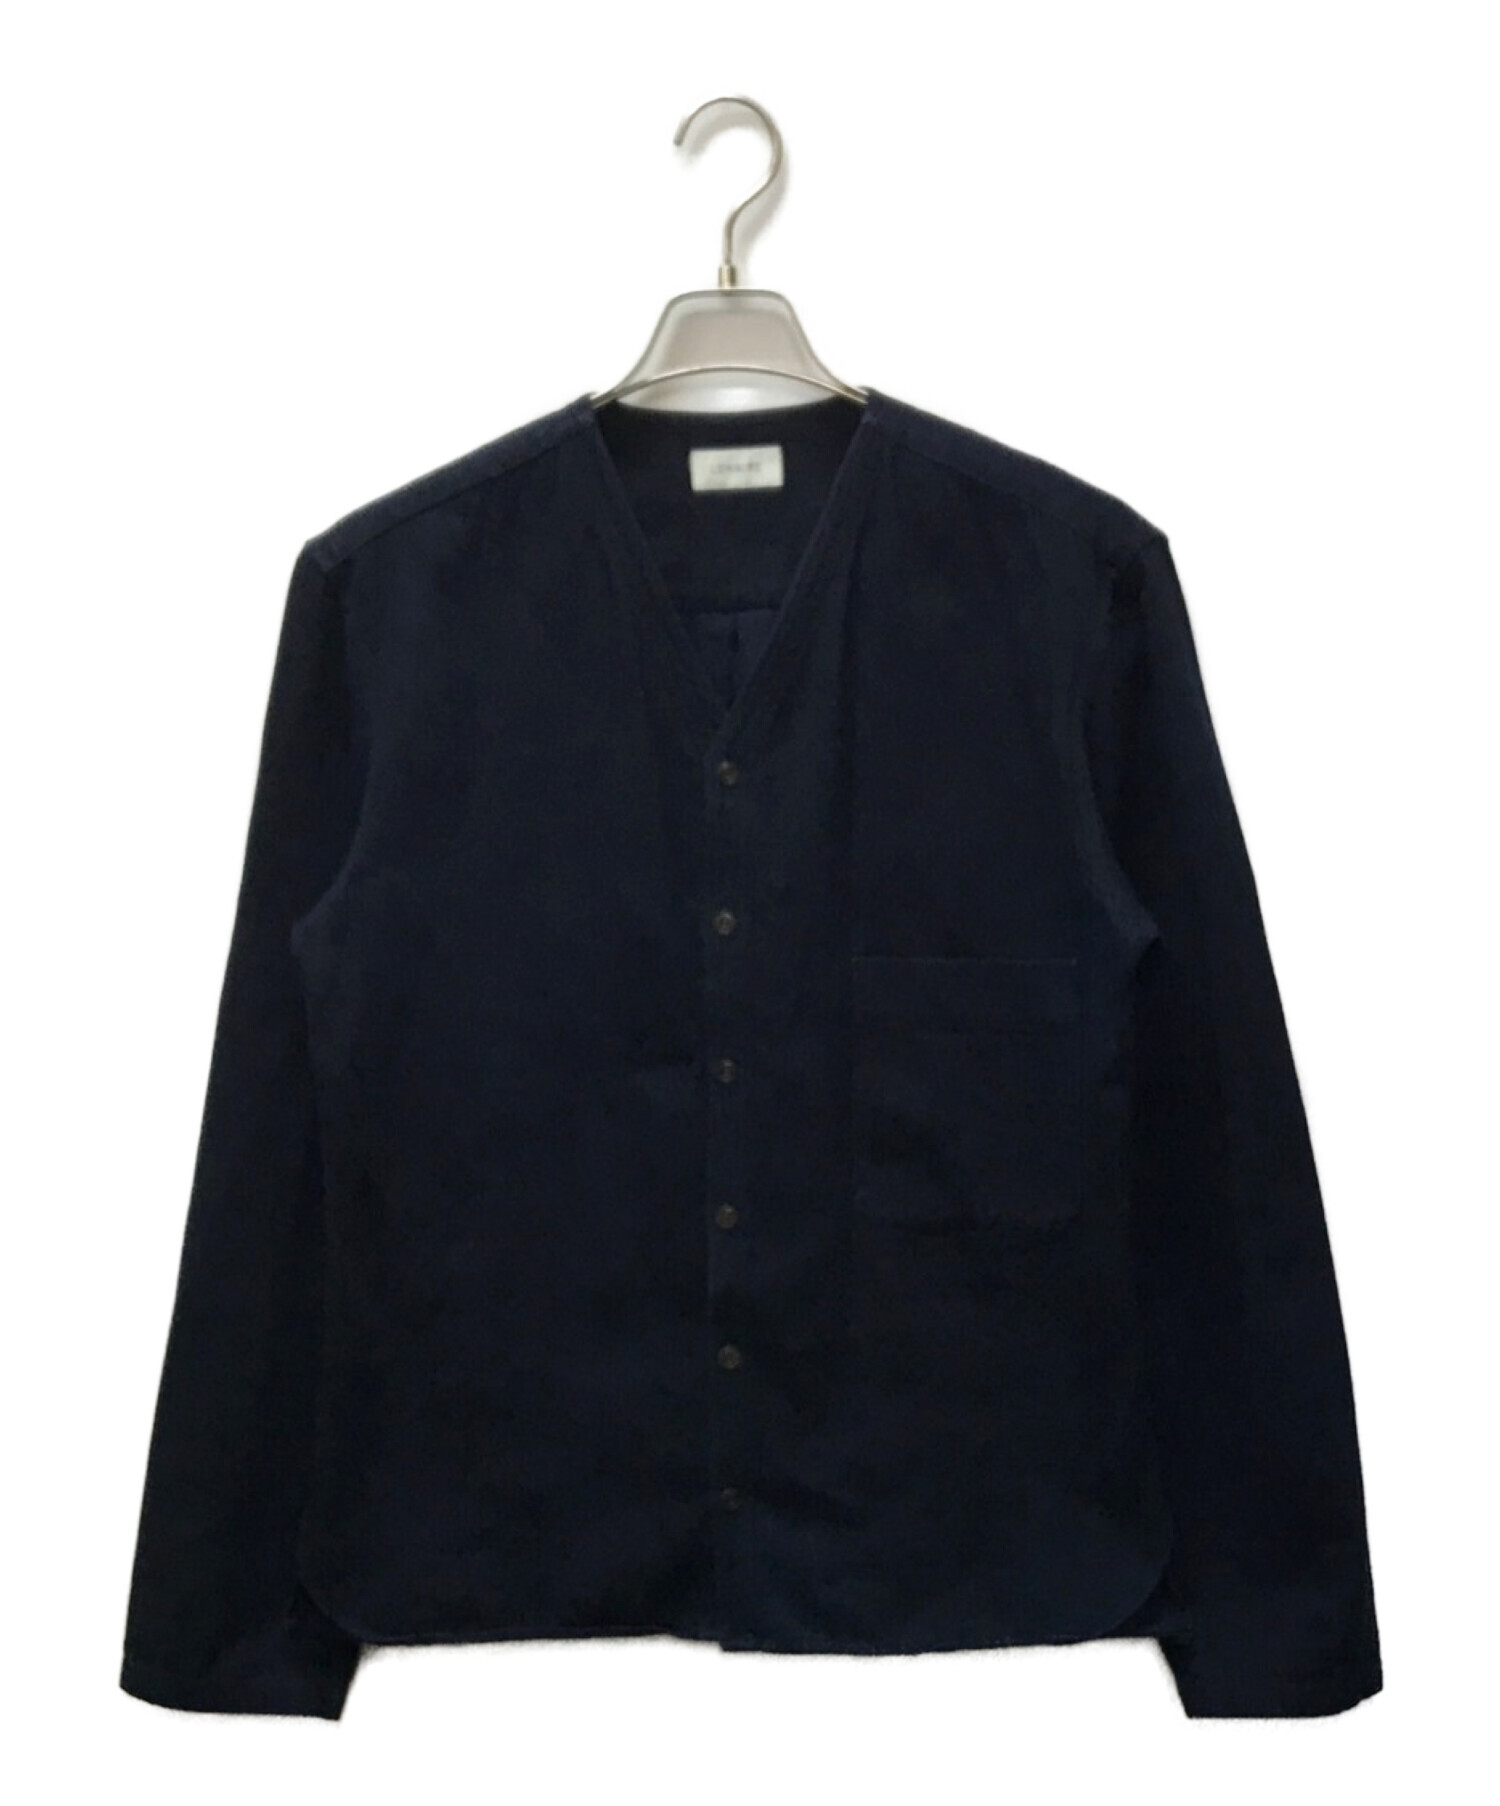 LEMAILEMAIRE(ルメール) V-Neck Collar Shirt Denim